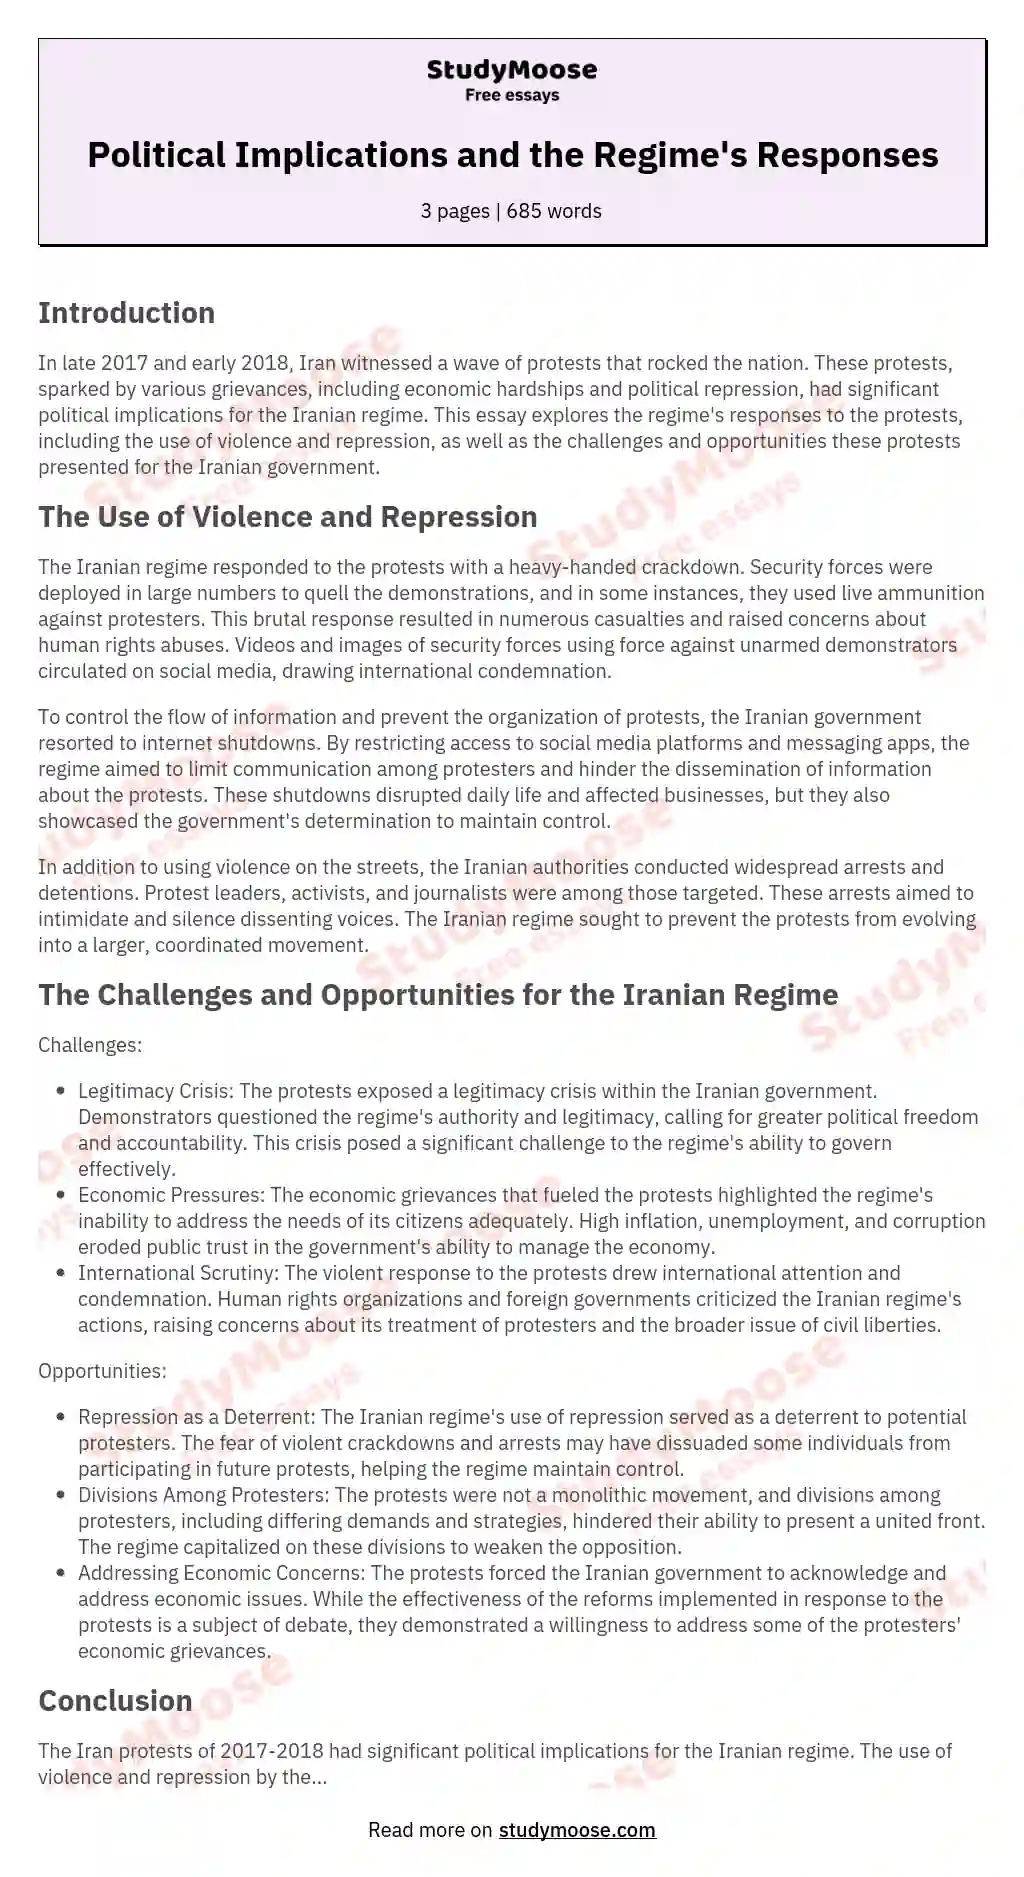 Political Implications and the Regime's Responses essay